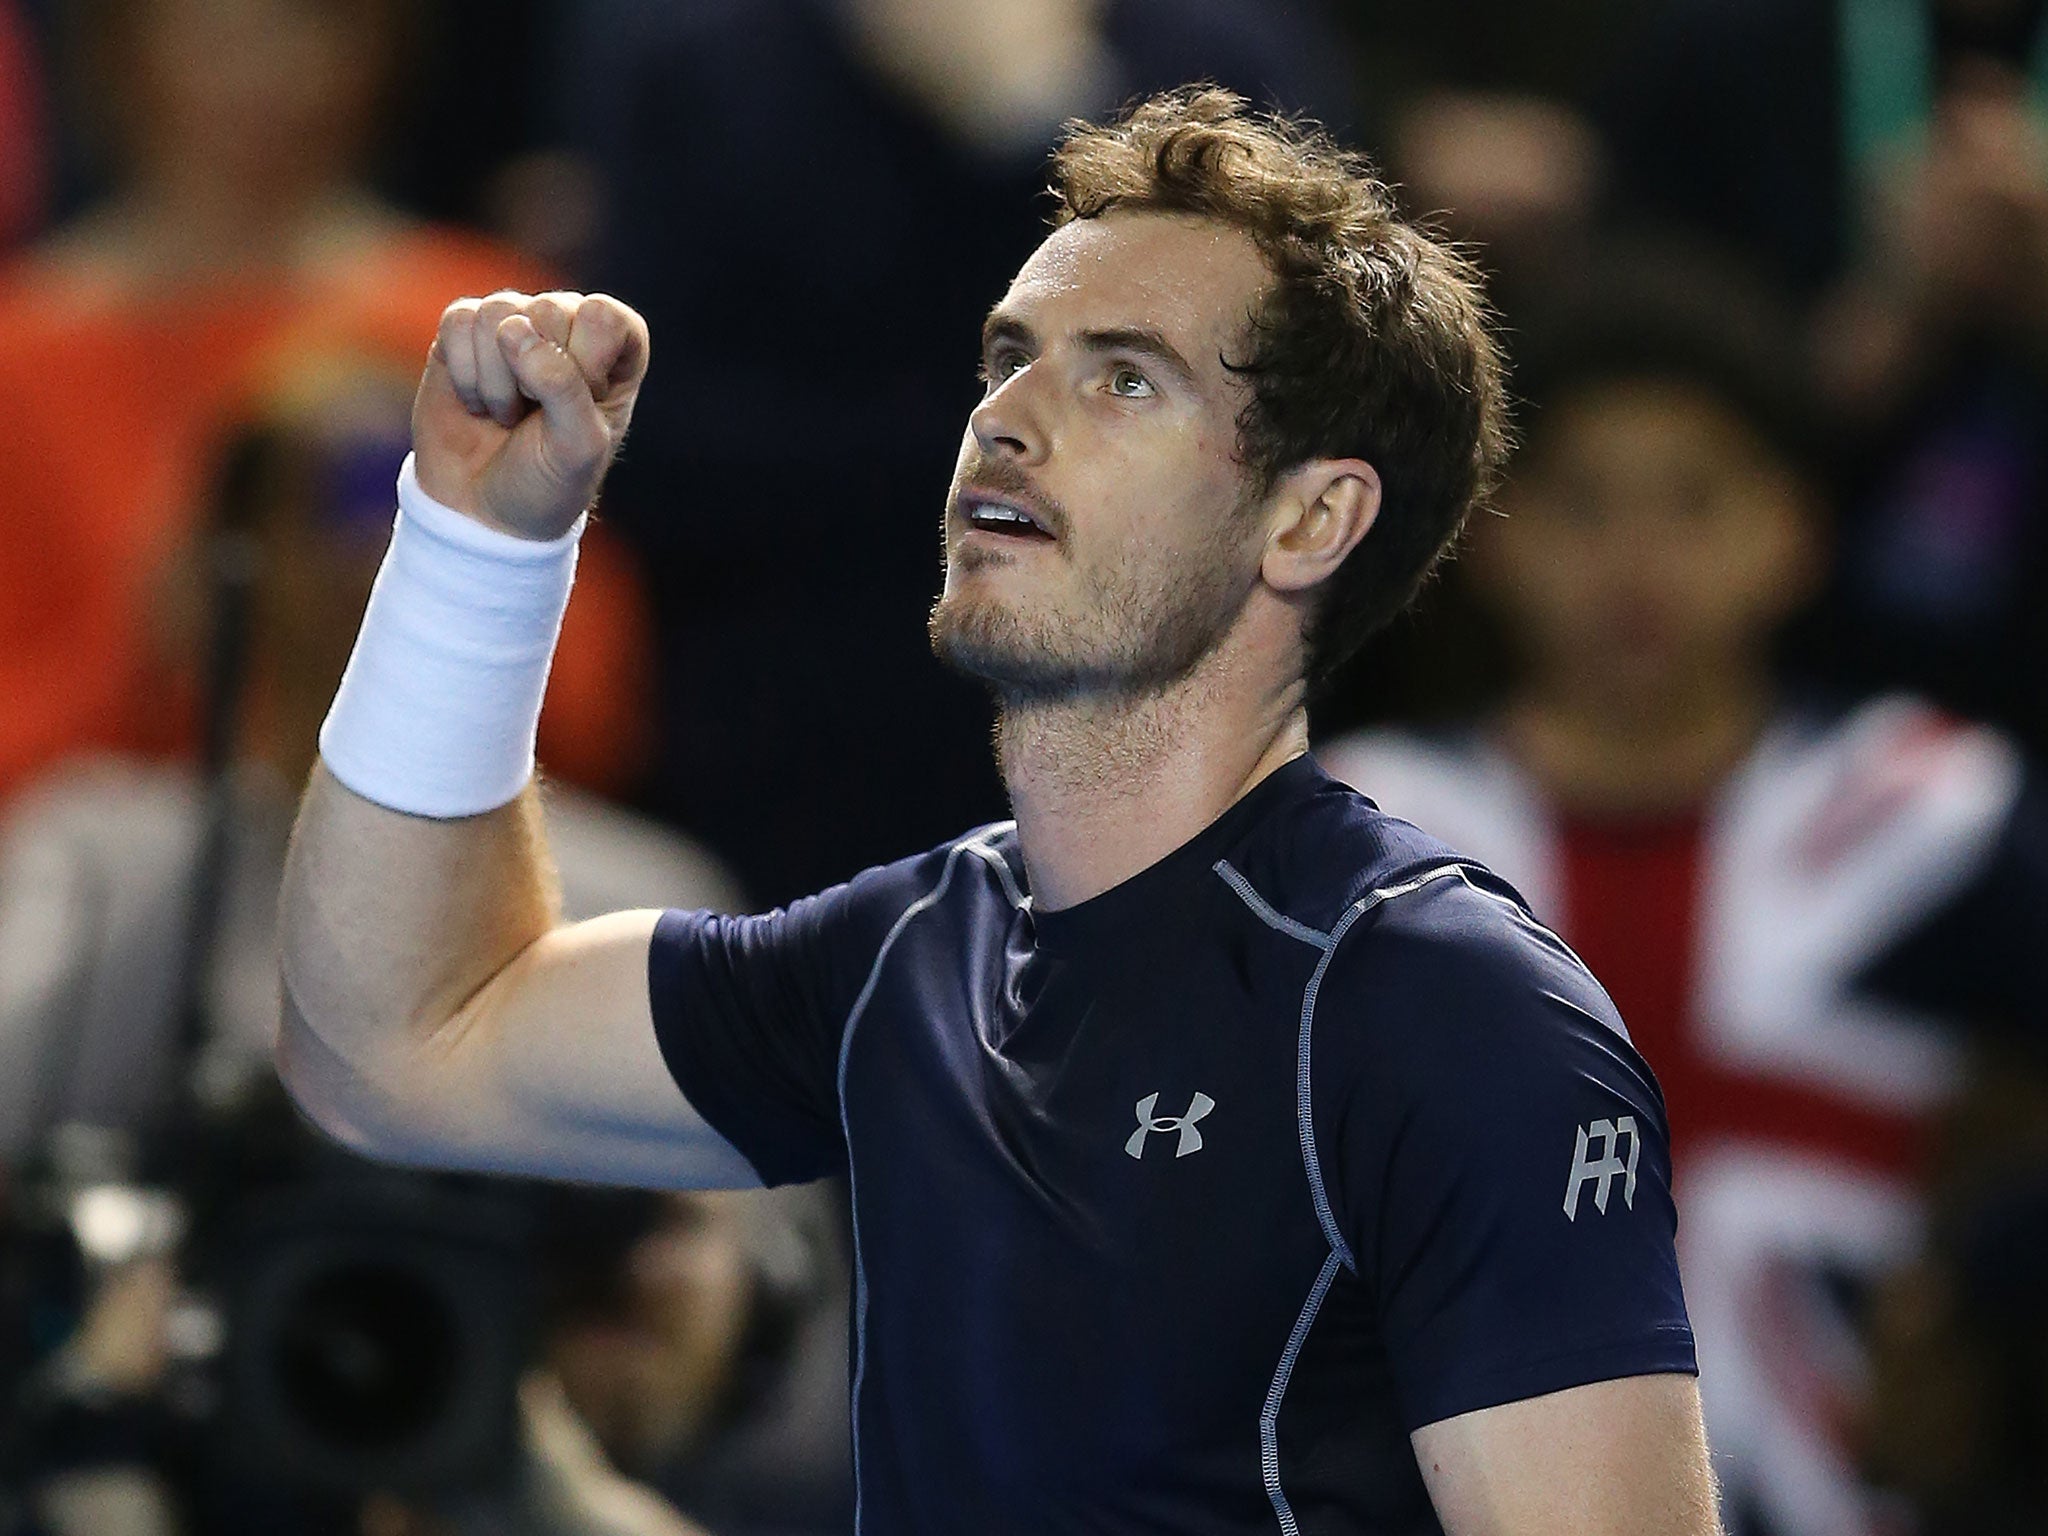 Andy Murray celebrates his Davis Cup victory over Taro Daniel of Japan